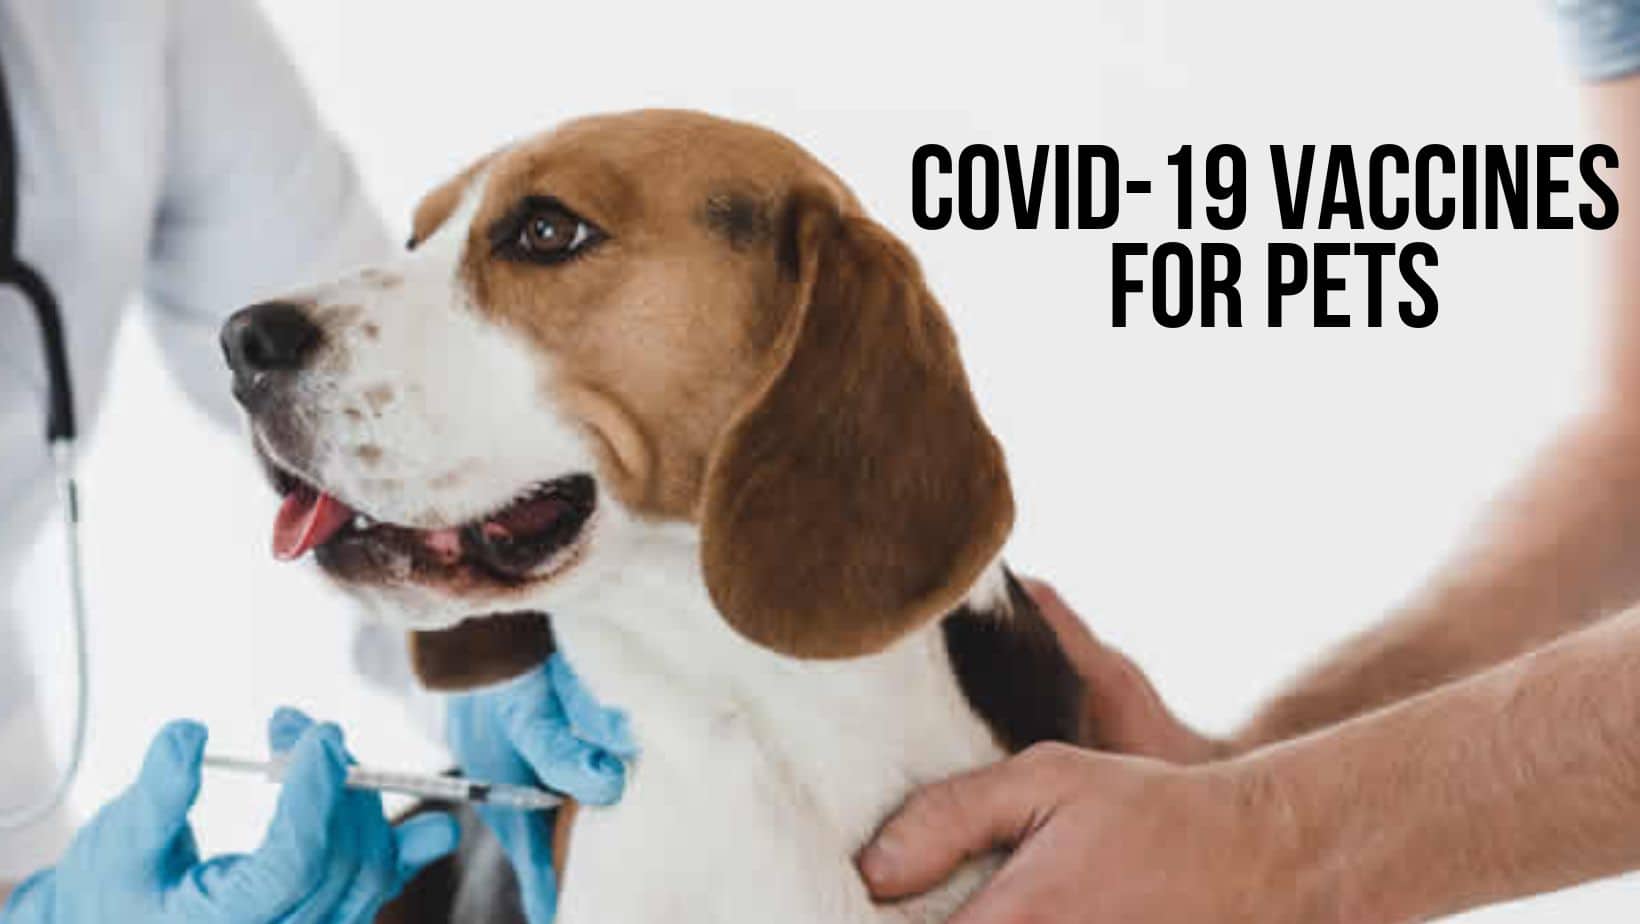 Do We Need a COVID-19 Vaccine For Pets? Here's What Expert Has To Say